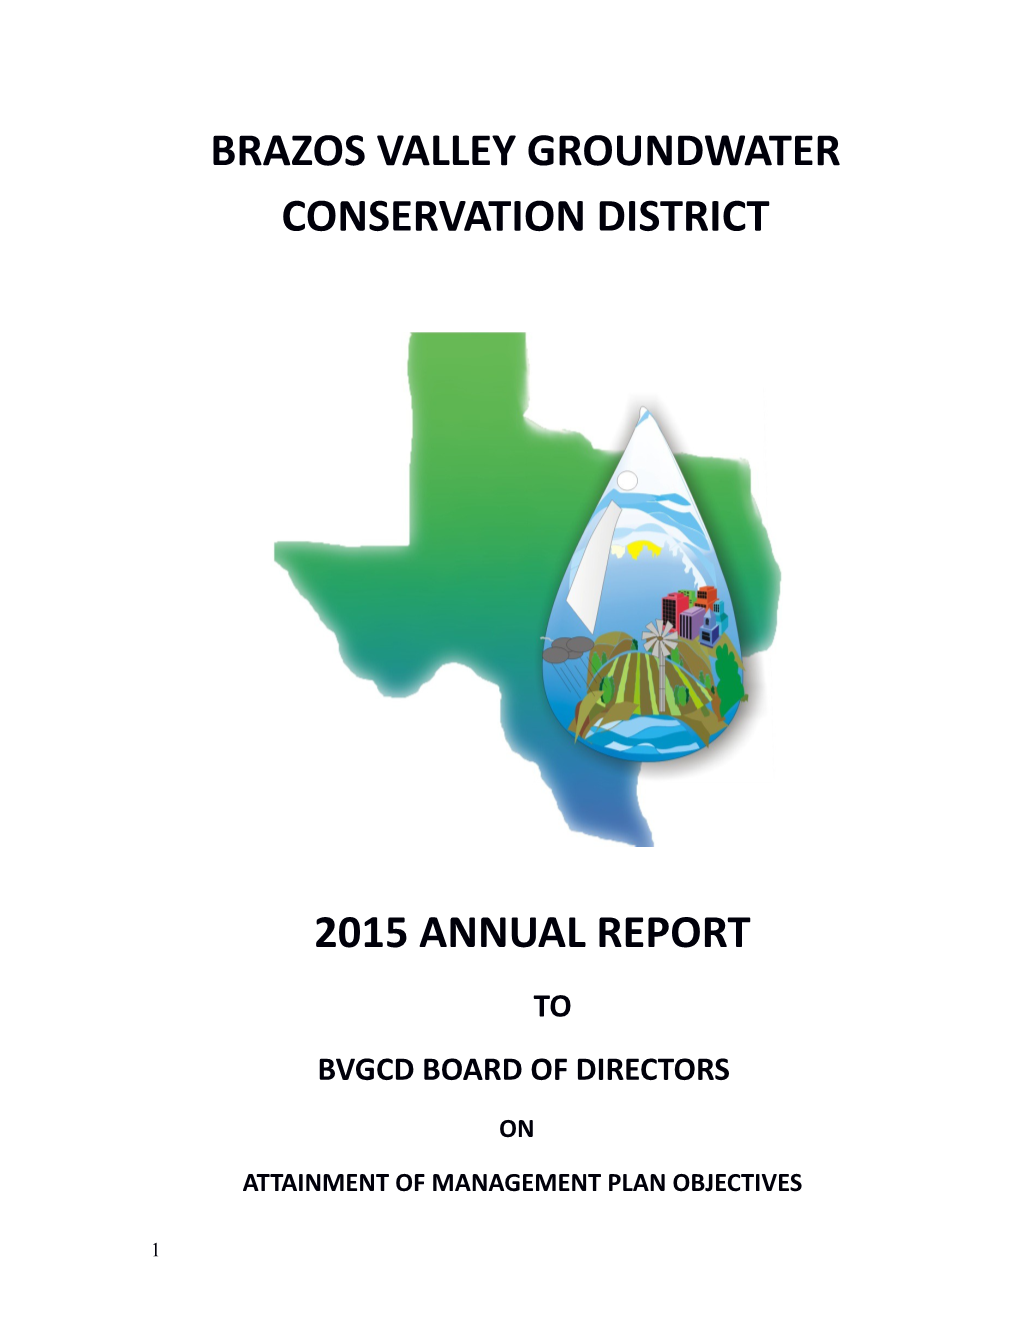 Brazos Valley Groundwater Conservation District